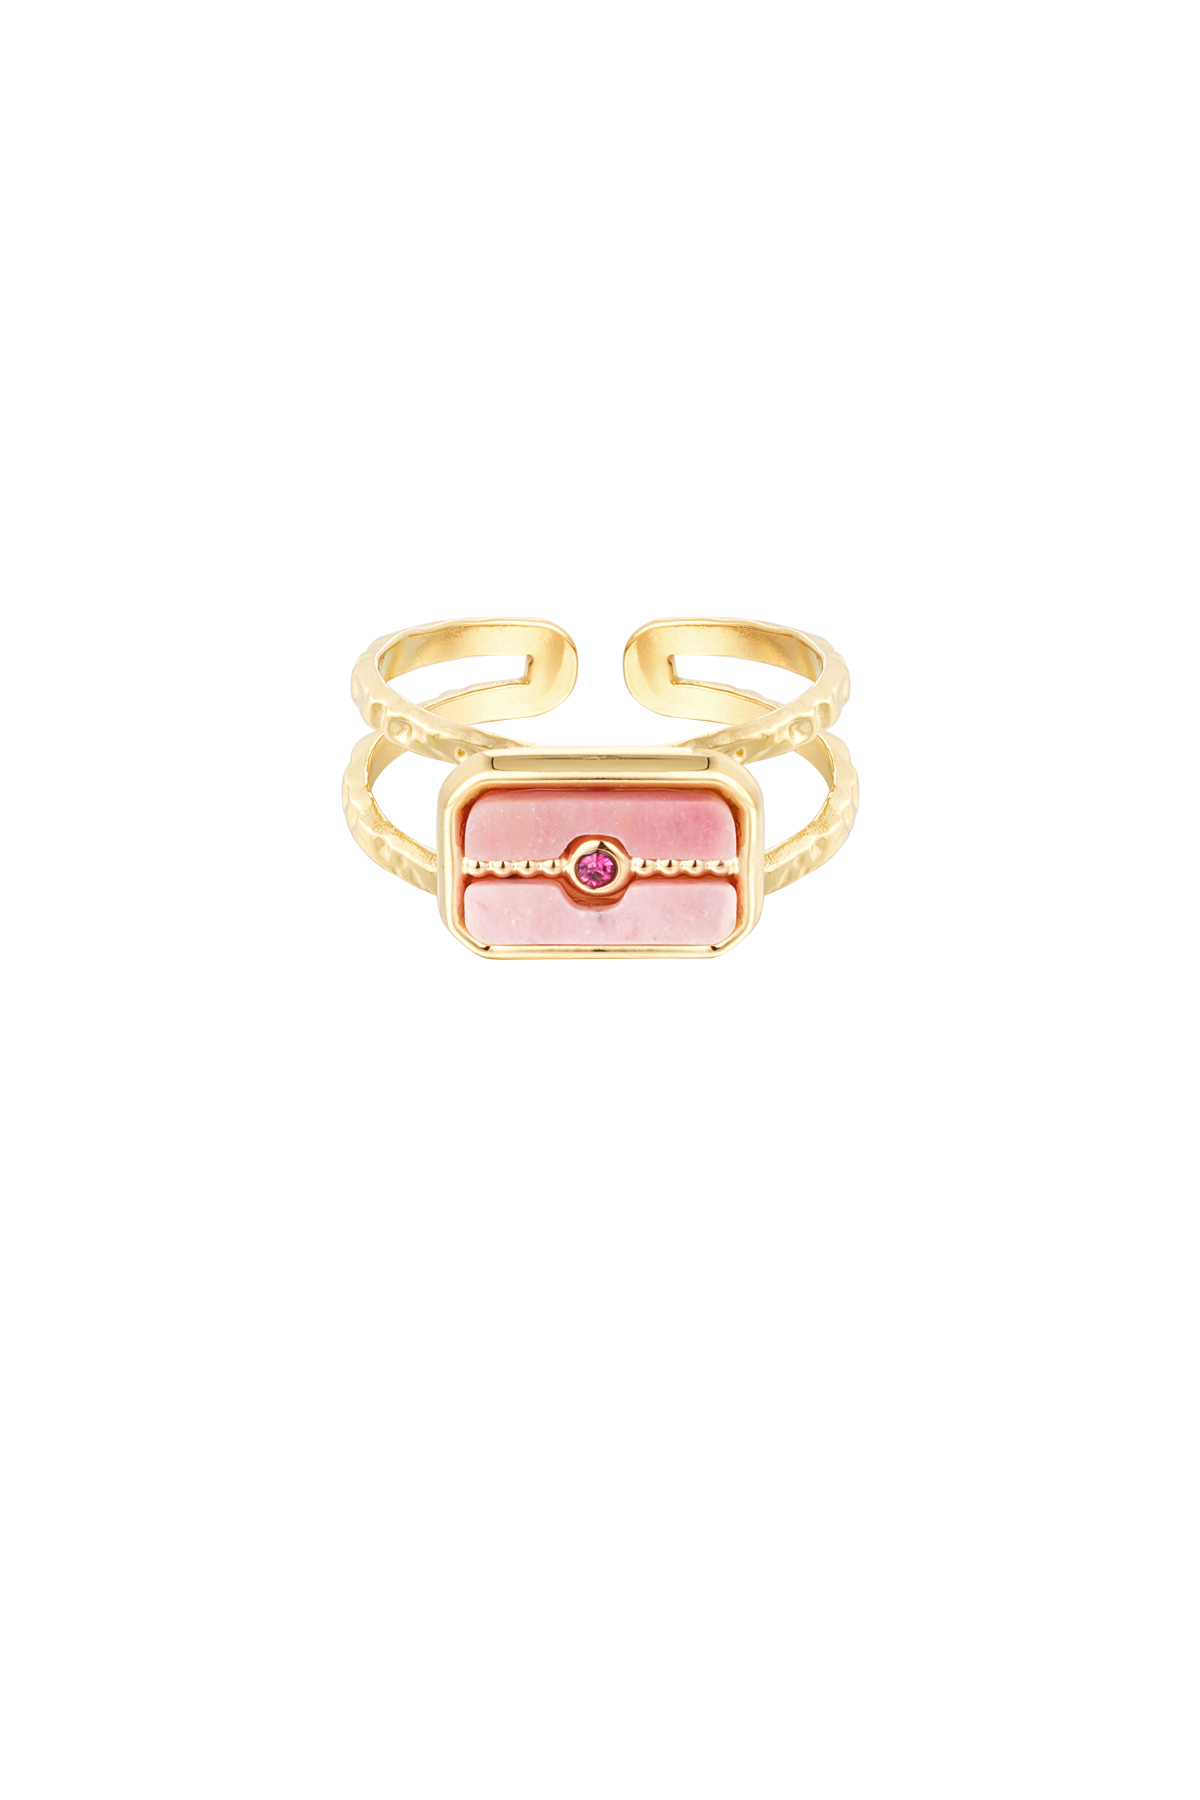 Ring decorated stone - gold/pink